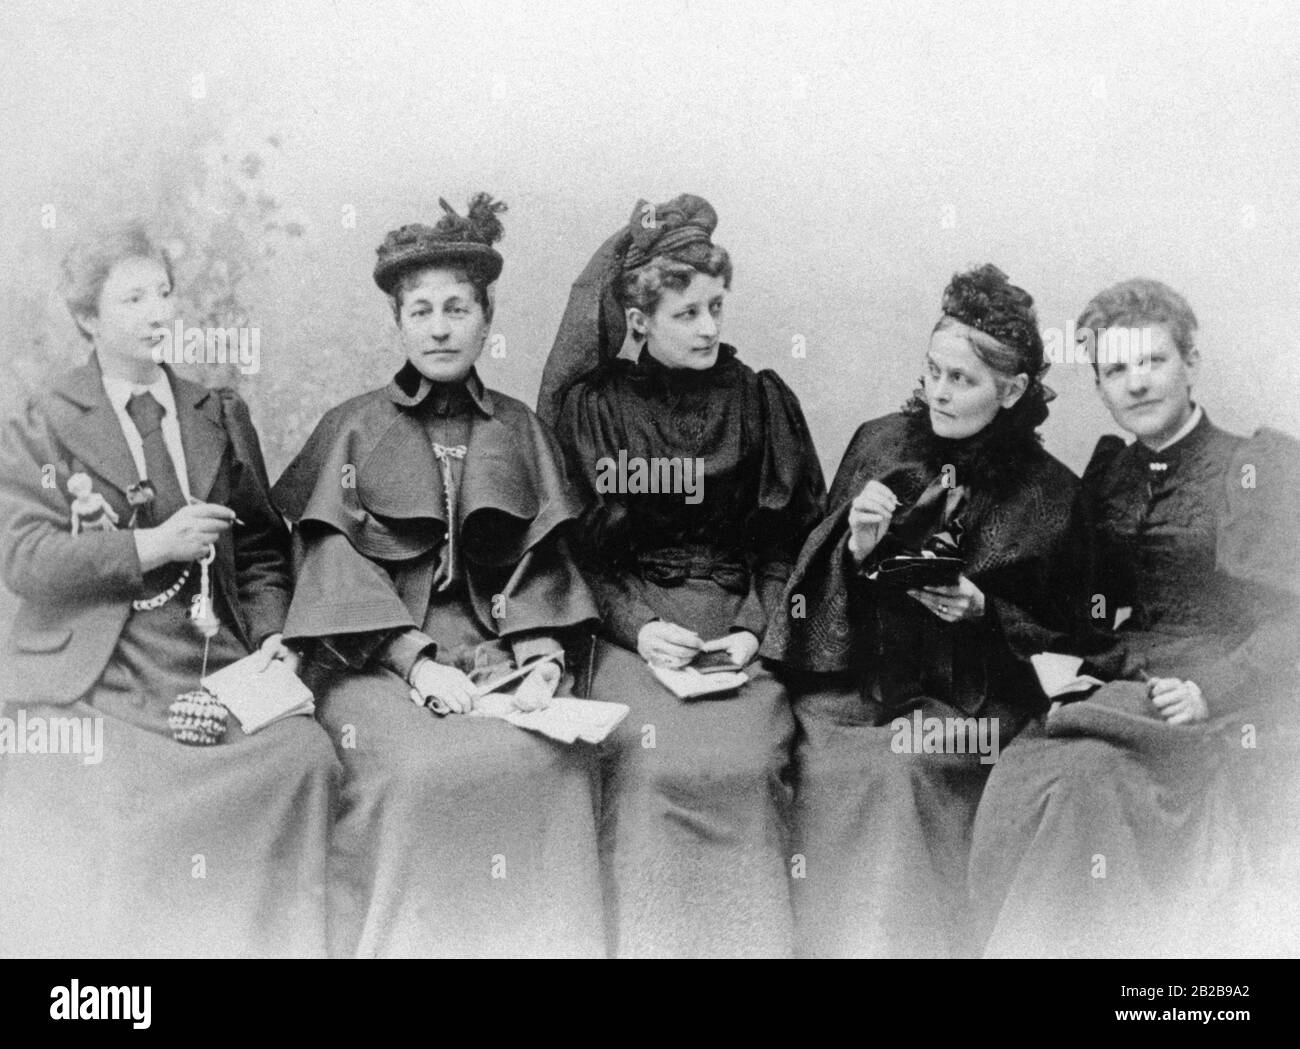 Members of the German women's movement at the turn of the century: from left to right Anita Augspurg, Marie Stritt, Lily Braun, Nina Cauer and Sophie Goudstikker (?). The photo was taken at the Elivra Studio, which was founded by Anita Augspurg and Sophia Goudstikker in Munich in 1887. Stock Photo